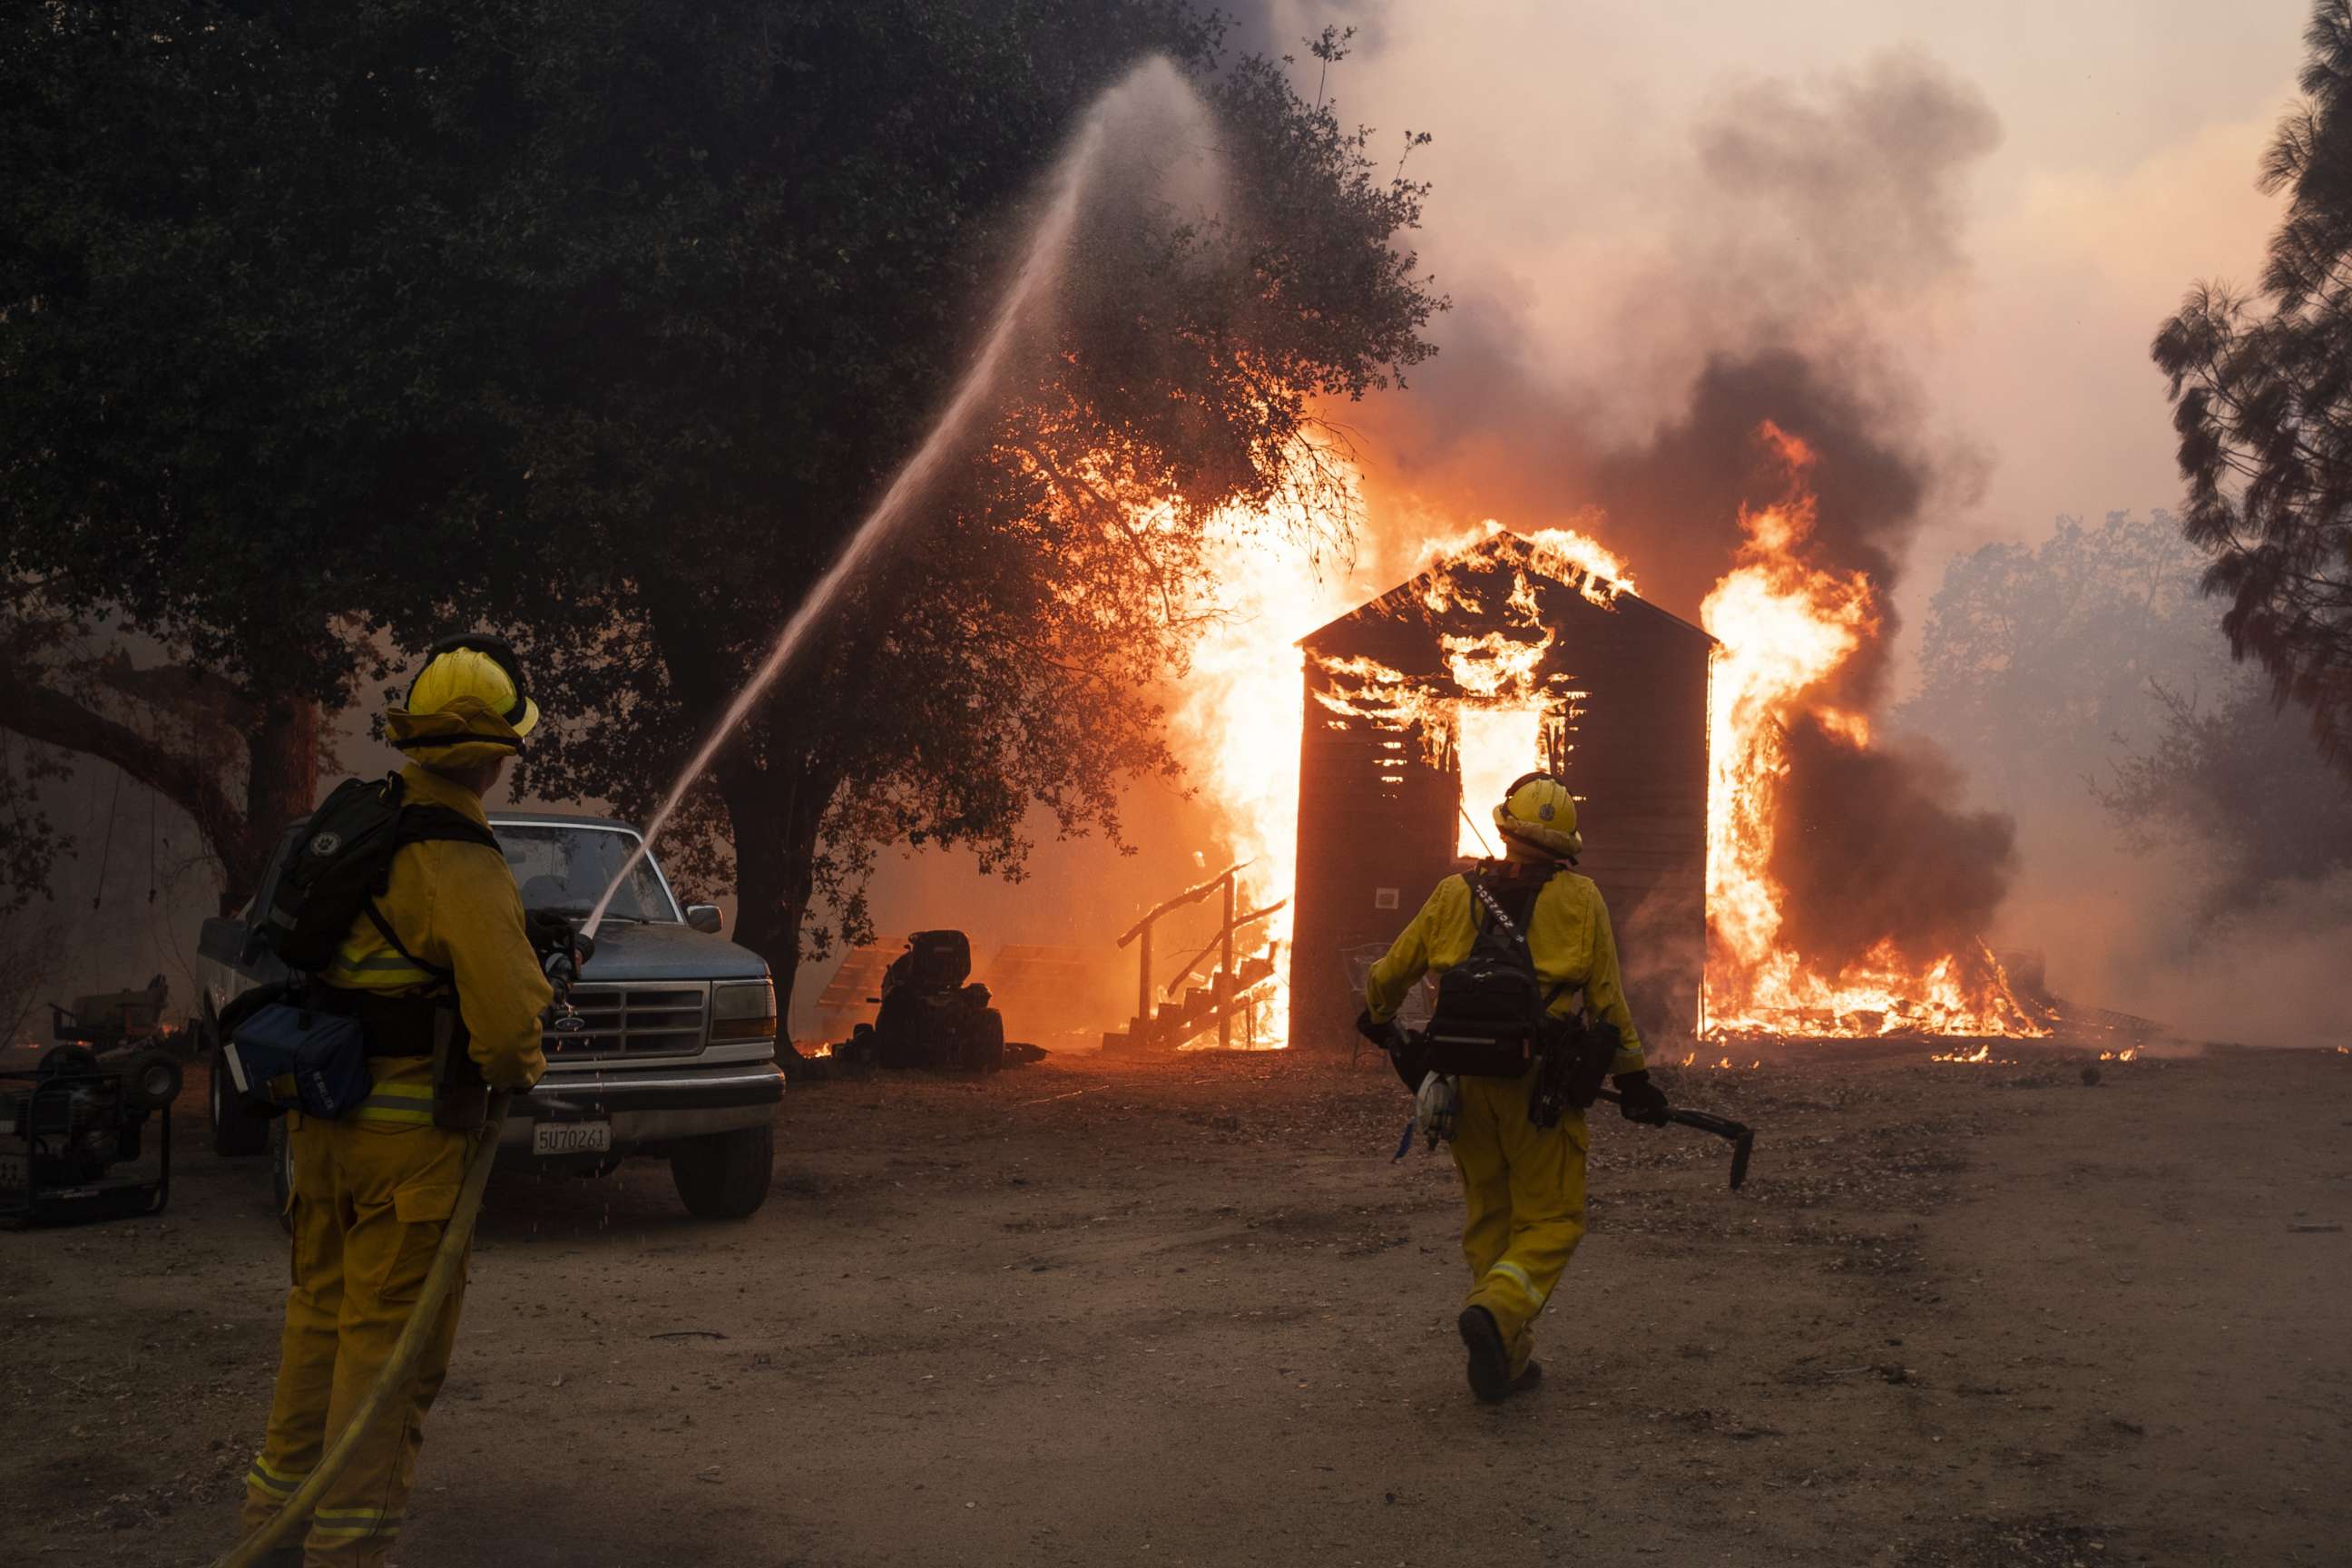 PHOTO: Firefighters work to prevent the fire from spreading during the Zogg fire near the town of Igo in Shasta County, Calif., Sept. 27, 2020.